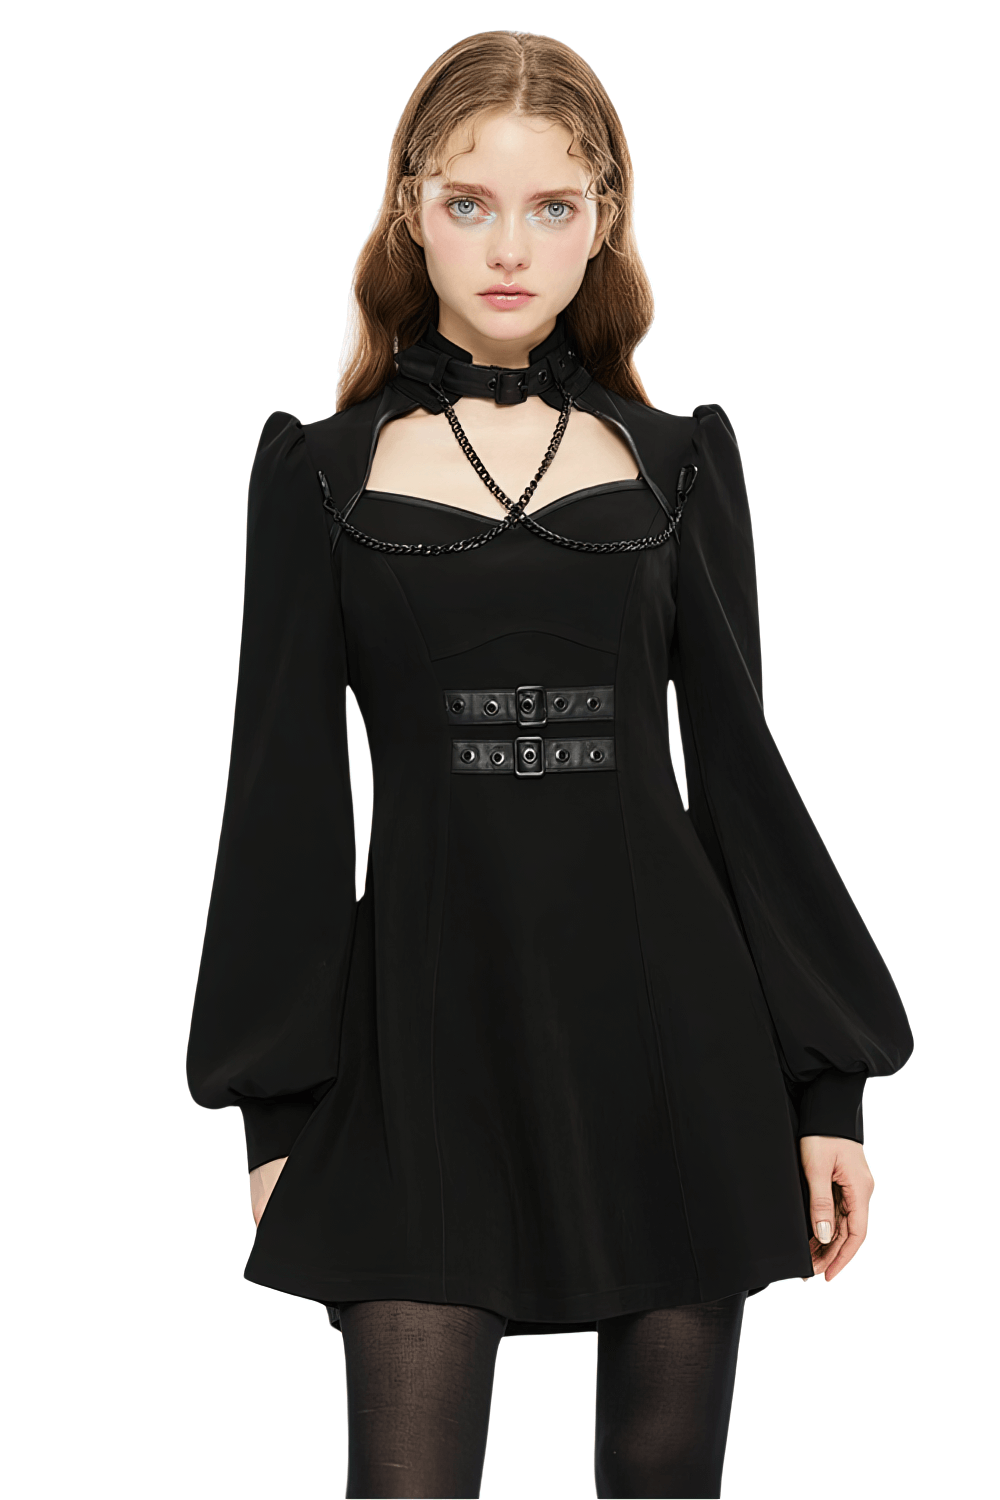 Punk Rave Black Gothic Techwear Dress with Chain and Clasps